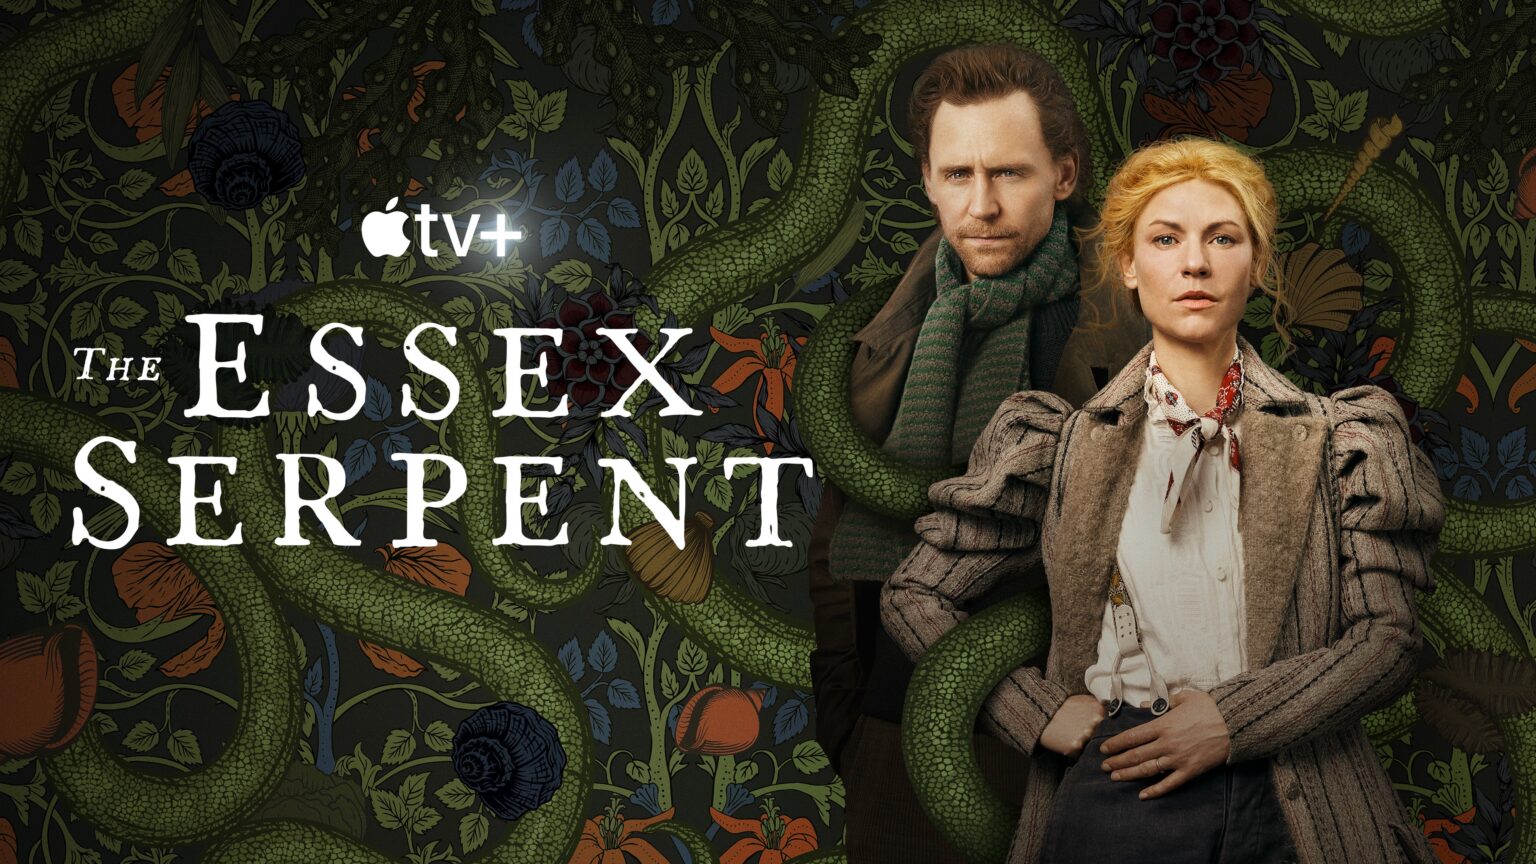 Trailer for Apple TV+'s 'Essex Serpent' is a mashup of science, religion and romance